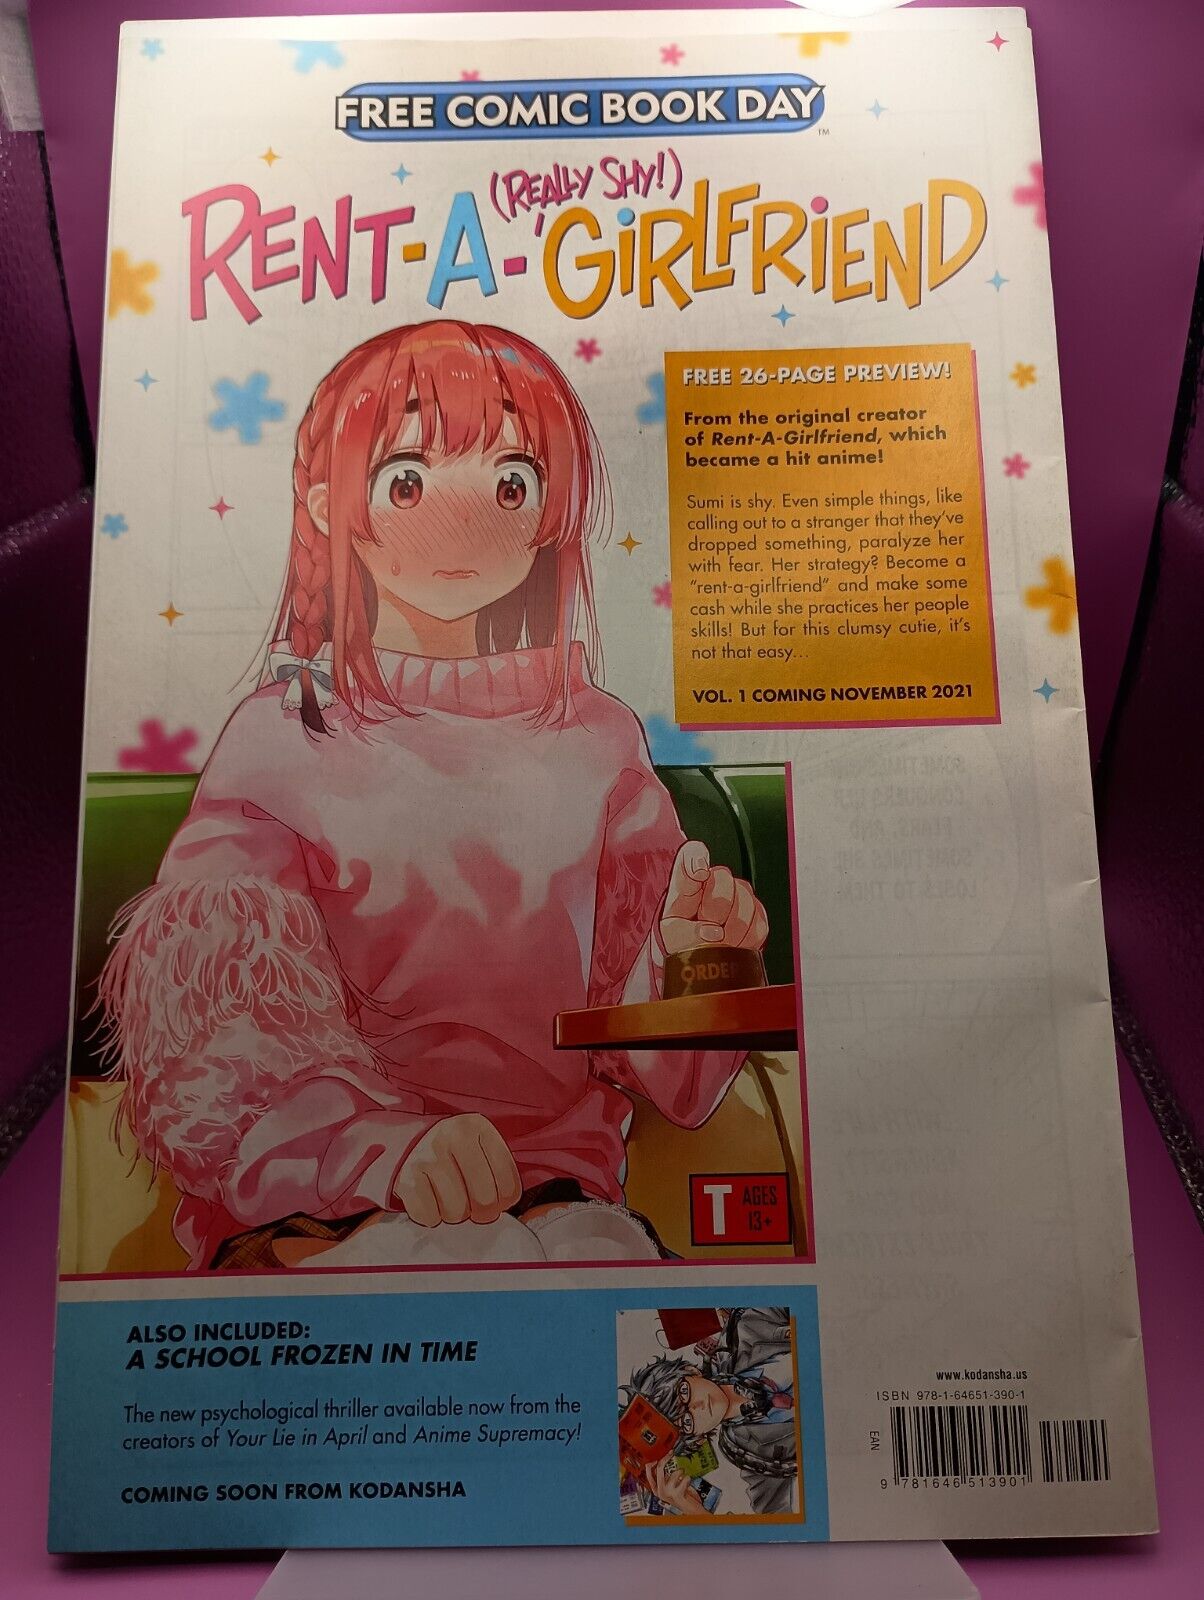 UNSTAMPED 2021 FCBD Rent a Really Shy Girlfriend Promotional Giveaway Comic Book